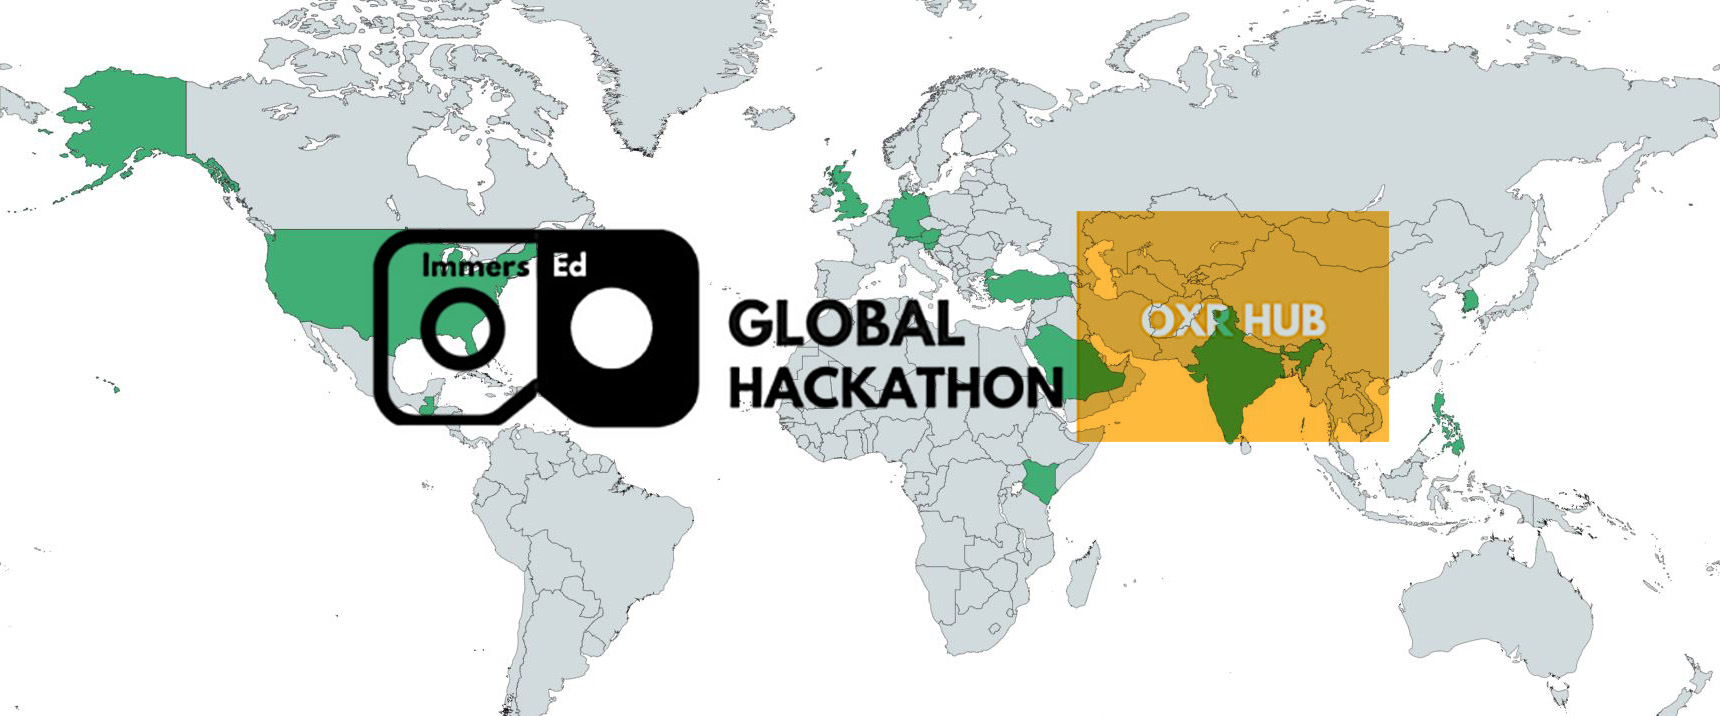 Winners of the Immers-Ed Global Hackathon: the First Hackathon at Oxford Devoted to Immersive Technologies